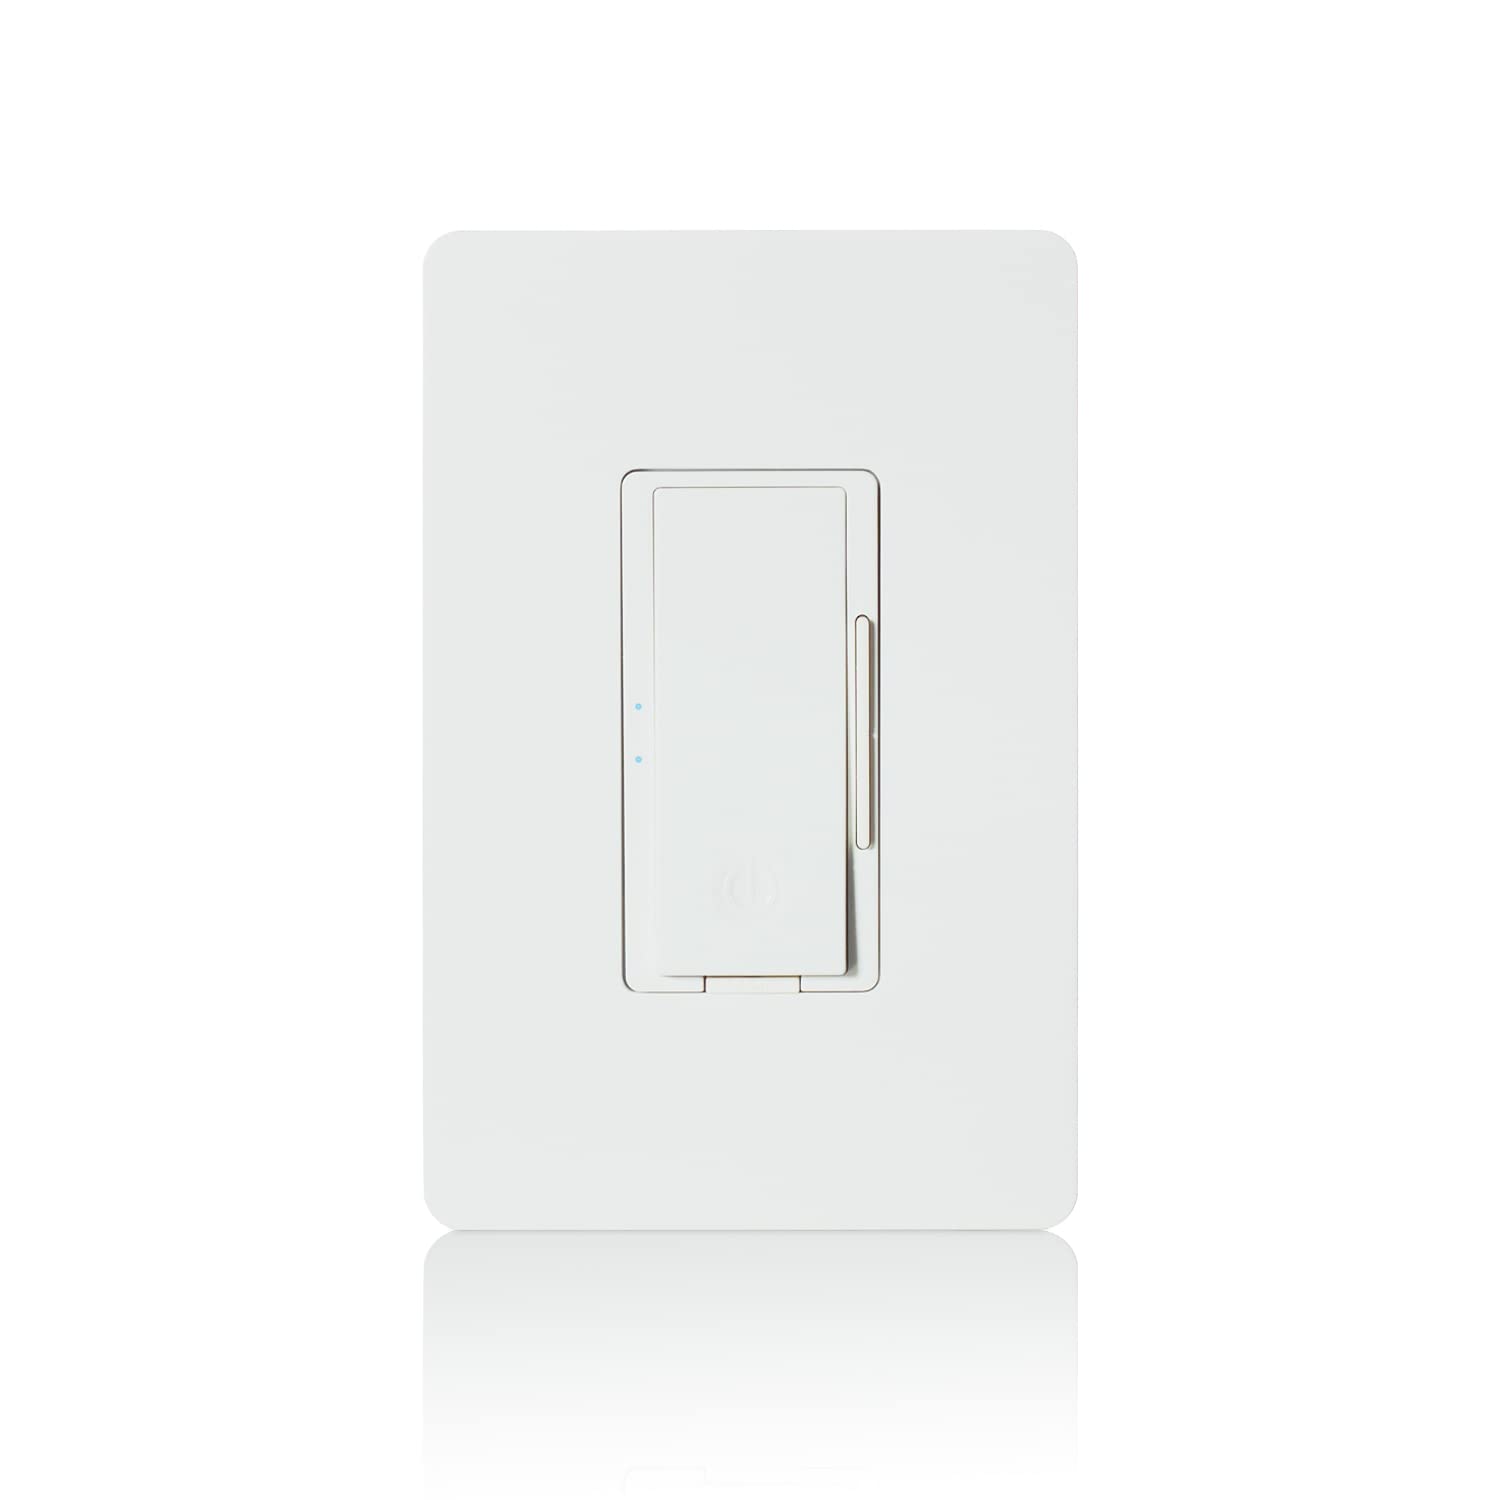 Smart Wall Dimmer Switch, WiFi Smart Light Switch Compatible with Alexa and Google Home, Single-Pole, WiFi Light Switch for LED Lights, No Hub Required, Etl Listed